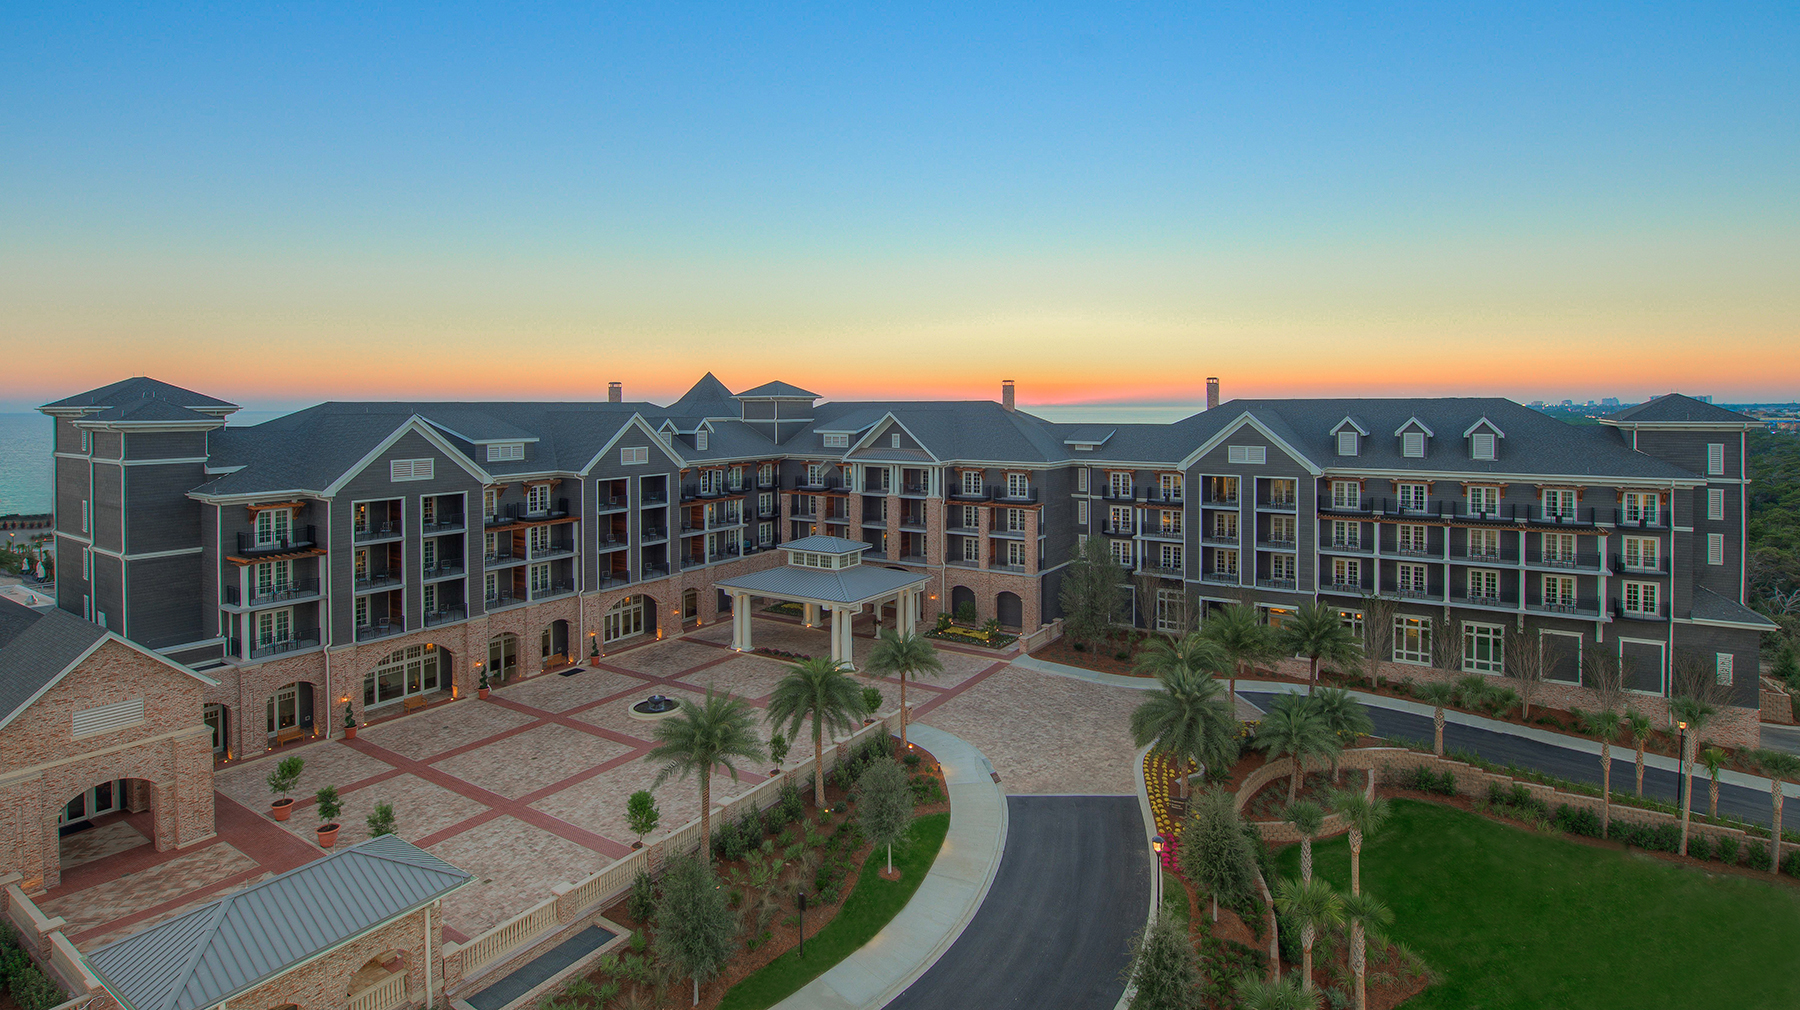 The Henderson Beach Resort & Spa Aerial at Sunset